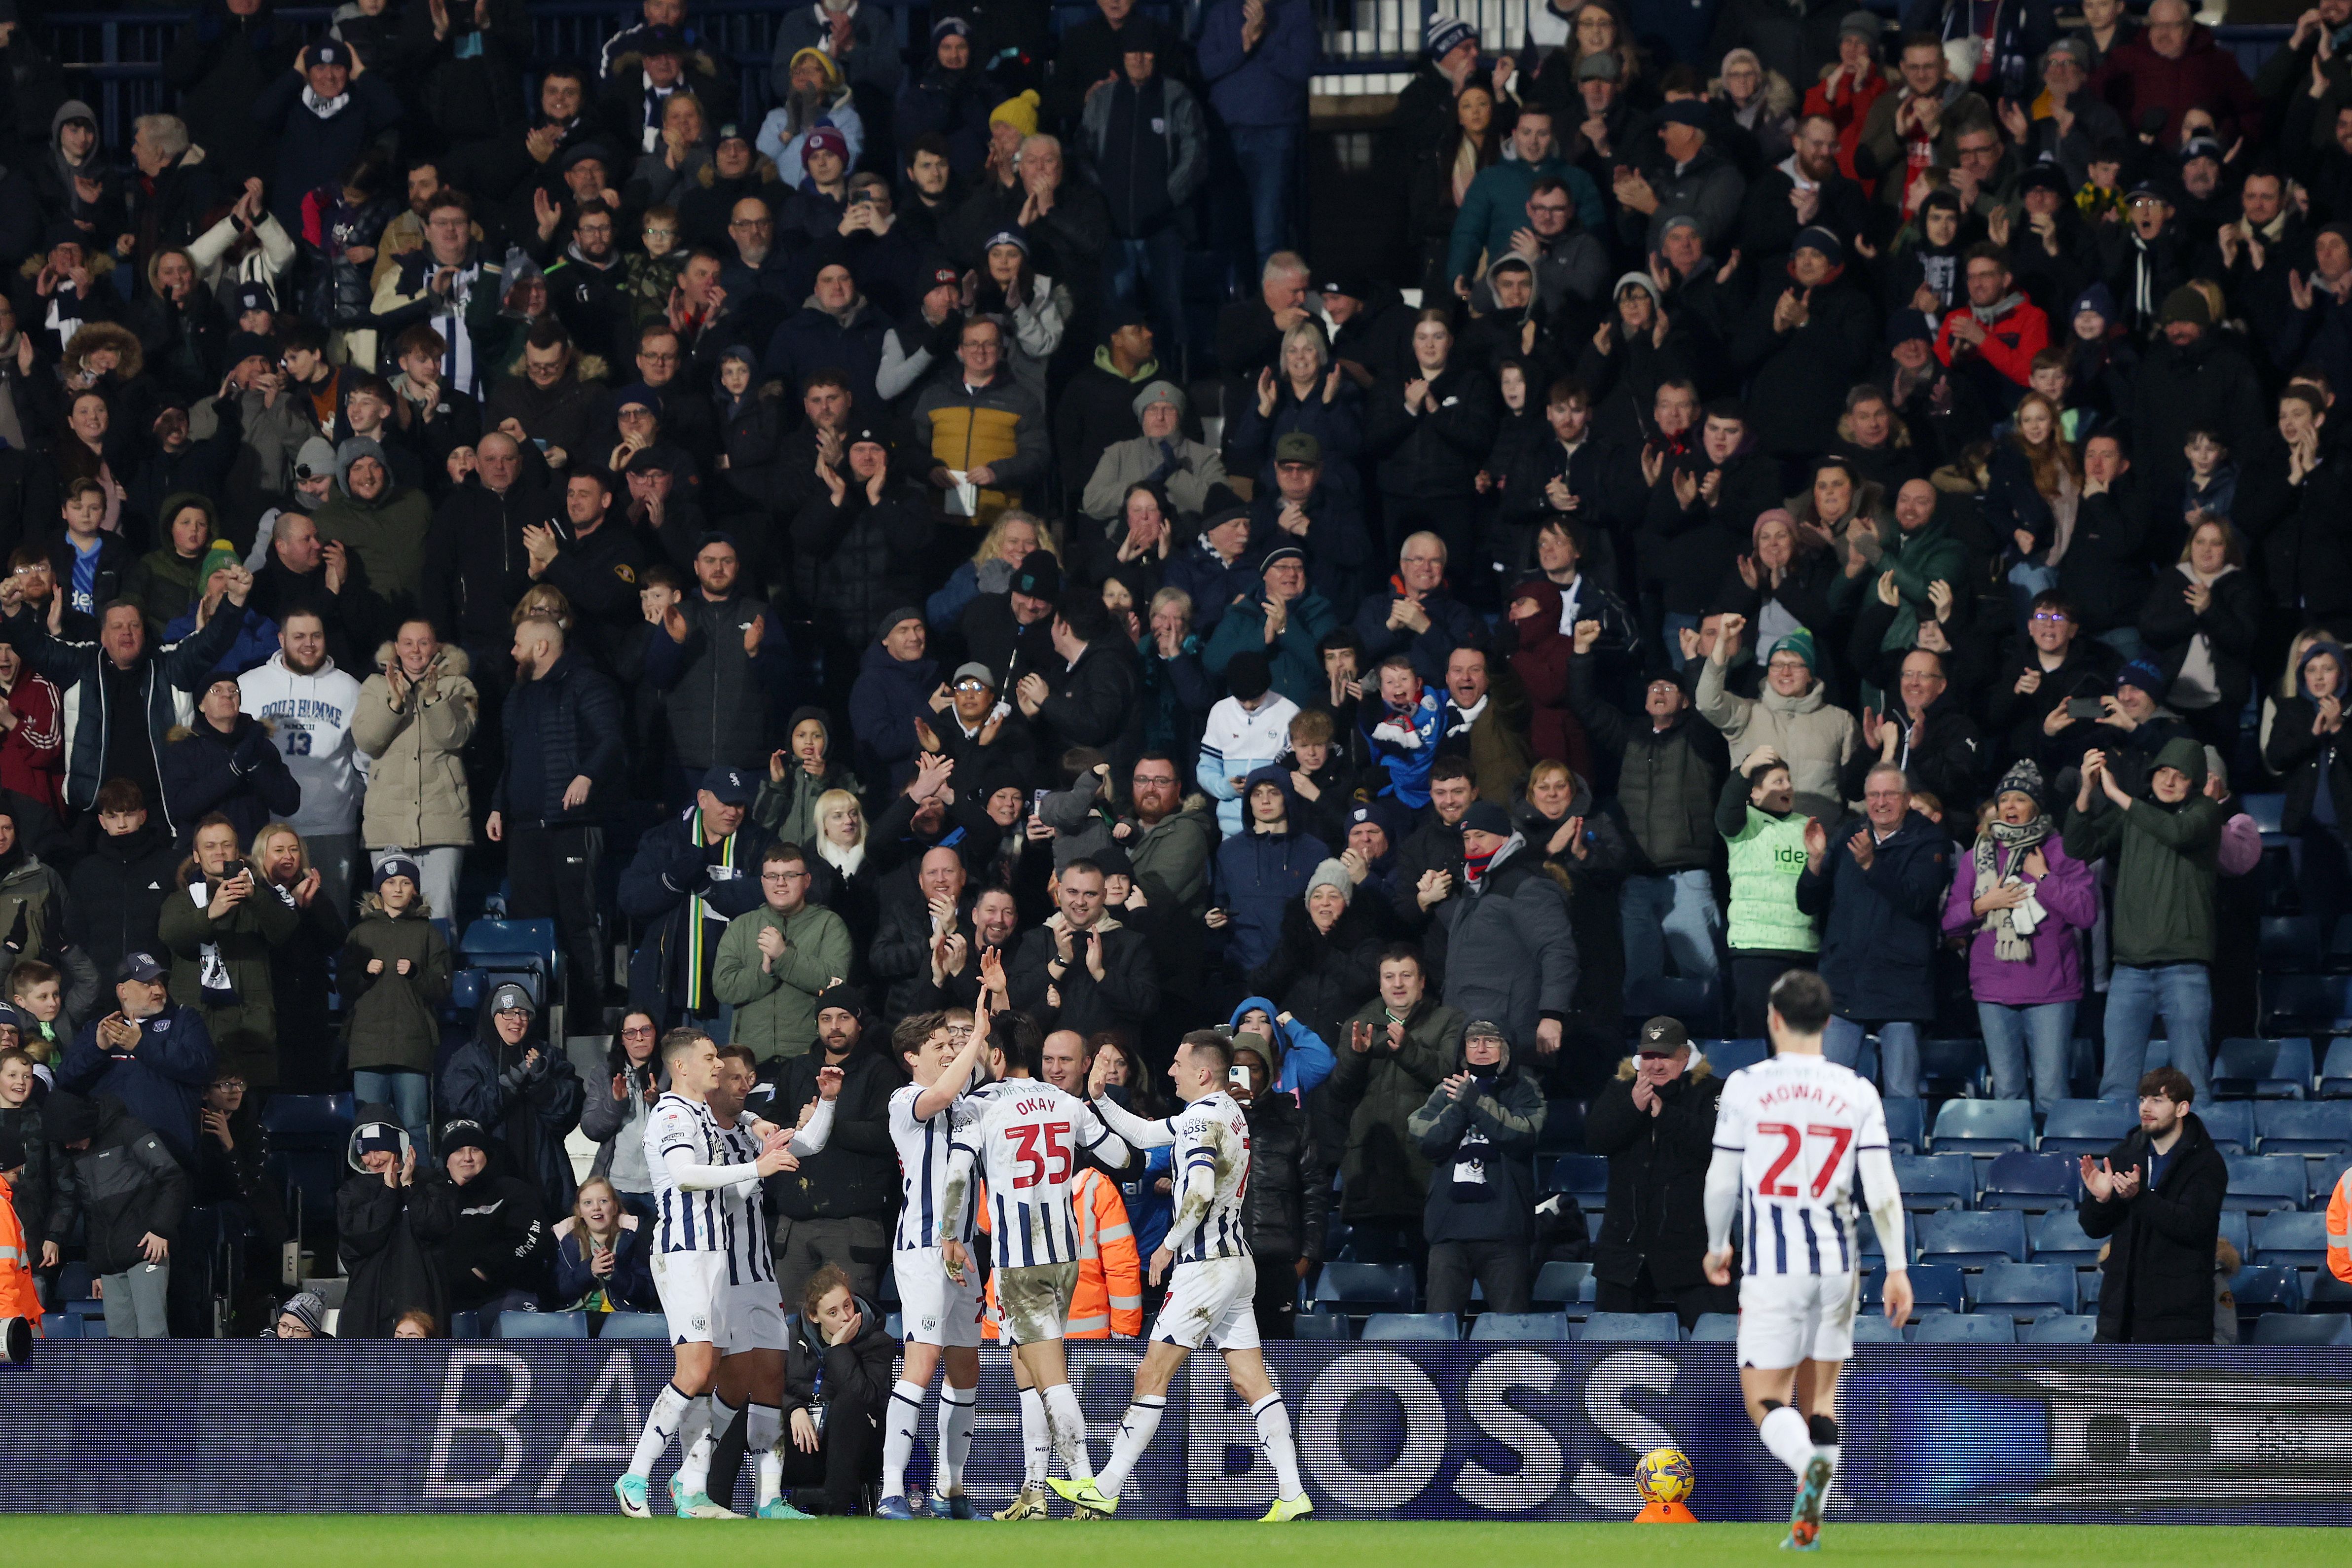 Albion players celebrate scoring against Cardiff with supporters in the stands behind them